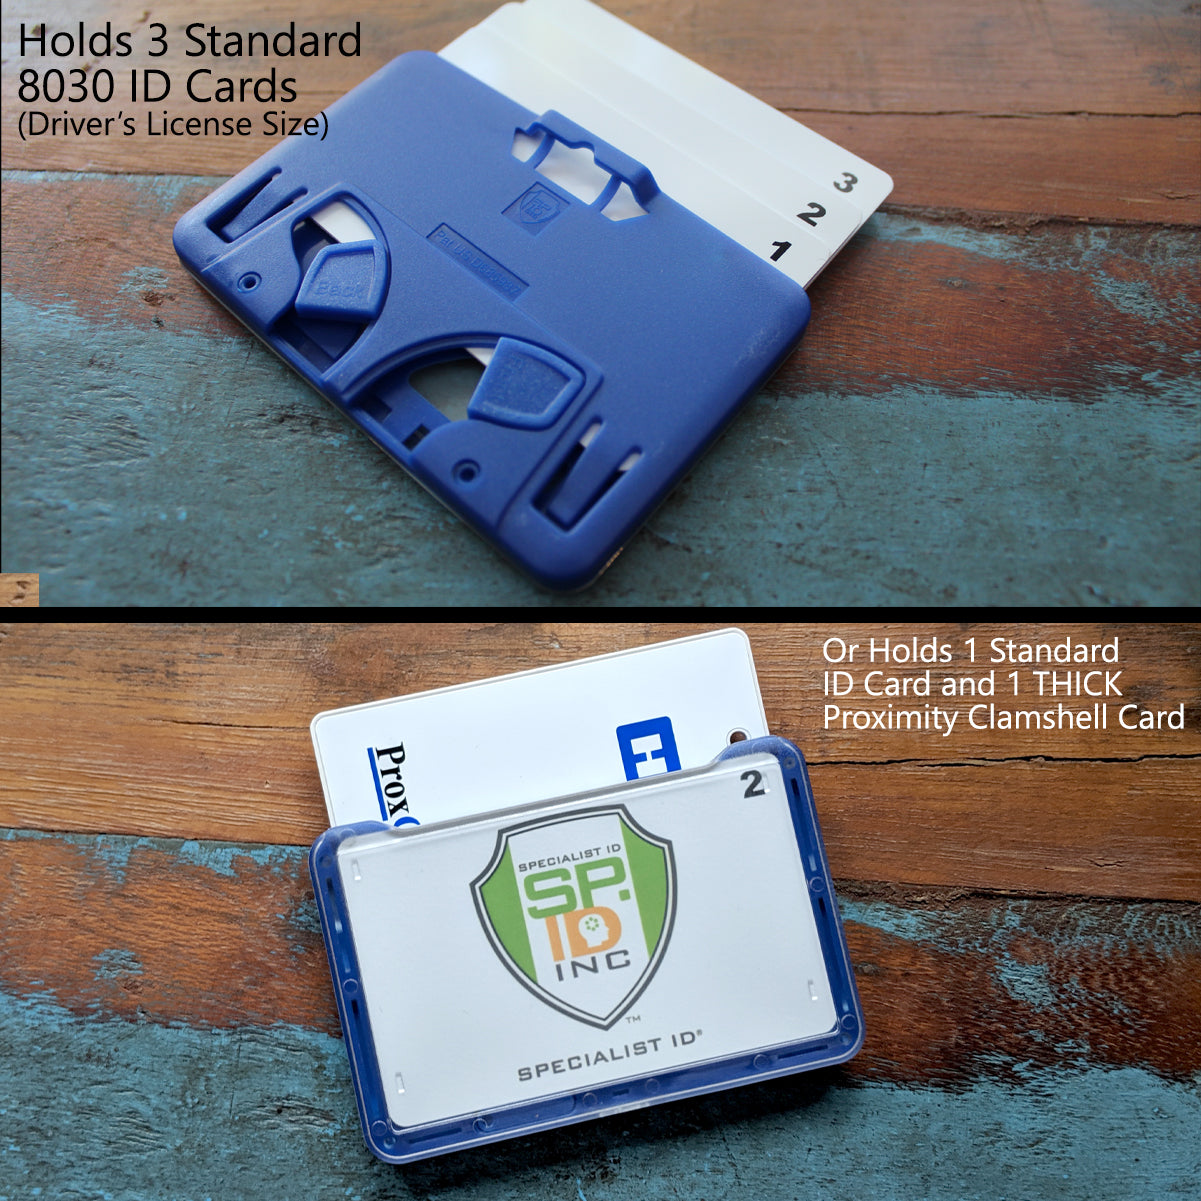 Blue badge holder shown with three standard ID cards and one thick proximity clamshell card on a wooden surface. Text indicates compatibility with up to three standard ID cards or one clamshell card, making it an ideal accessory for professional work wear. Specialist ID Horizontal 3 Card Badge Holder & Heavy Duty Lanyard with Breakaway Clip and Key Ring - Hard Plastic Rigid Name Tag Protector - Top Load for Three Badges shown as an example.